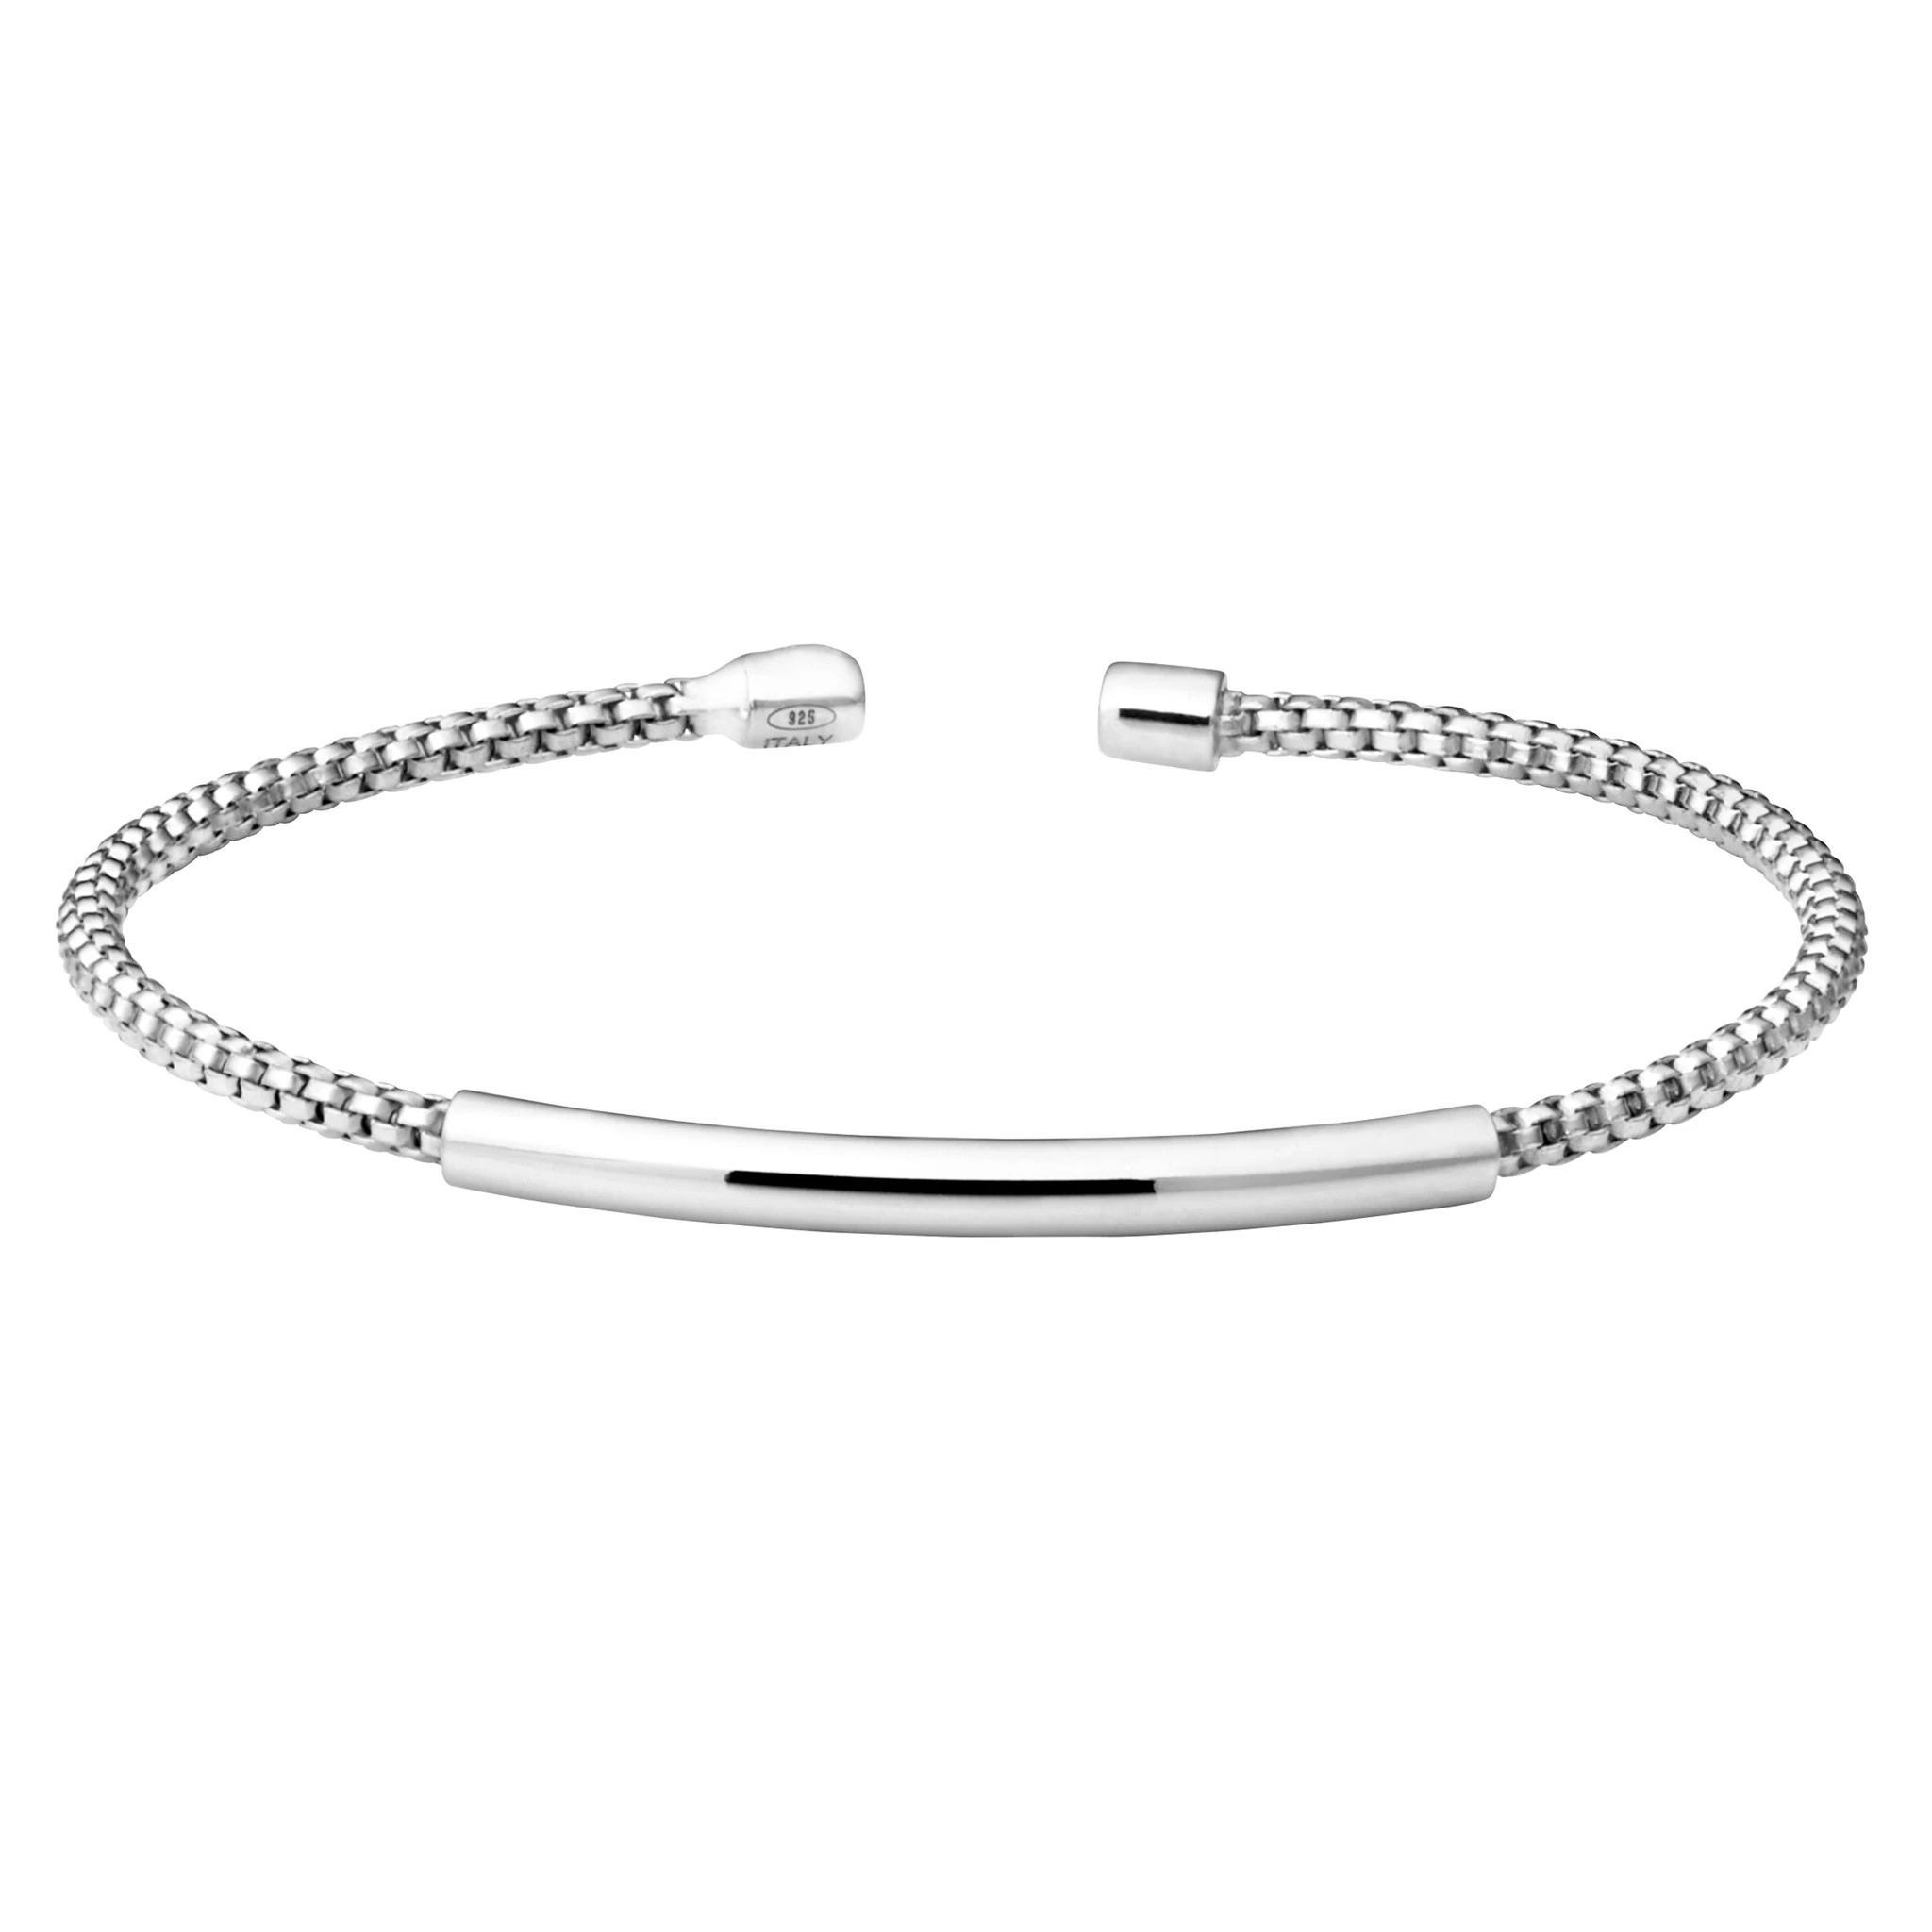 Rhodium Finish Sterling Silver Rounded Box Link Cuff Bracelet w/High Polished Bar